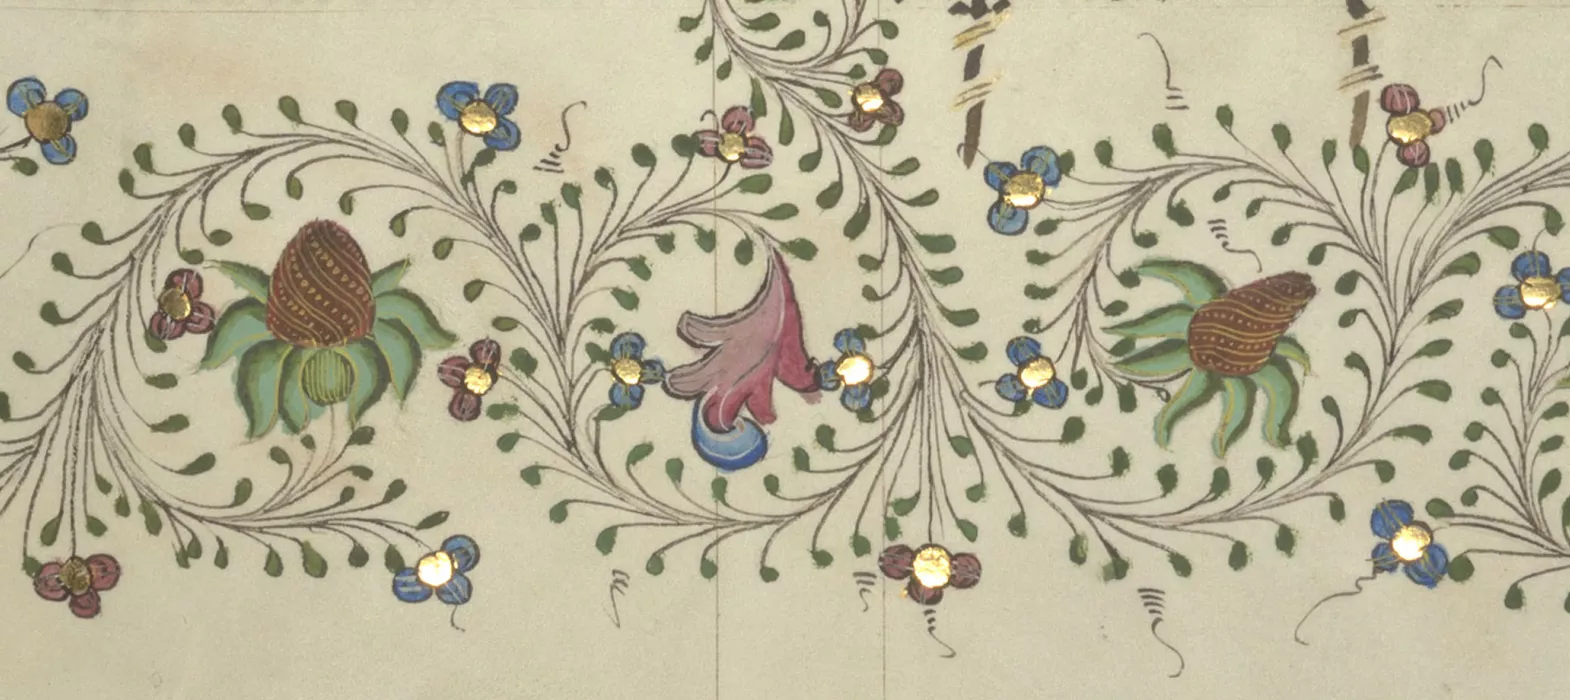 MS 11, f. 220r [detail], New College Library, Oxford